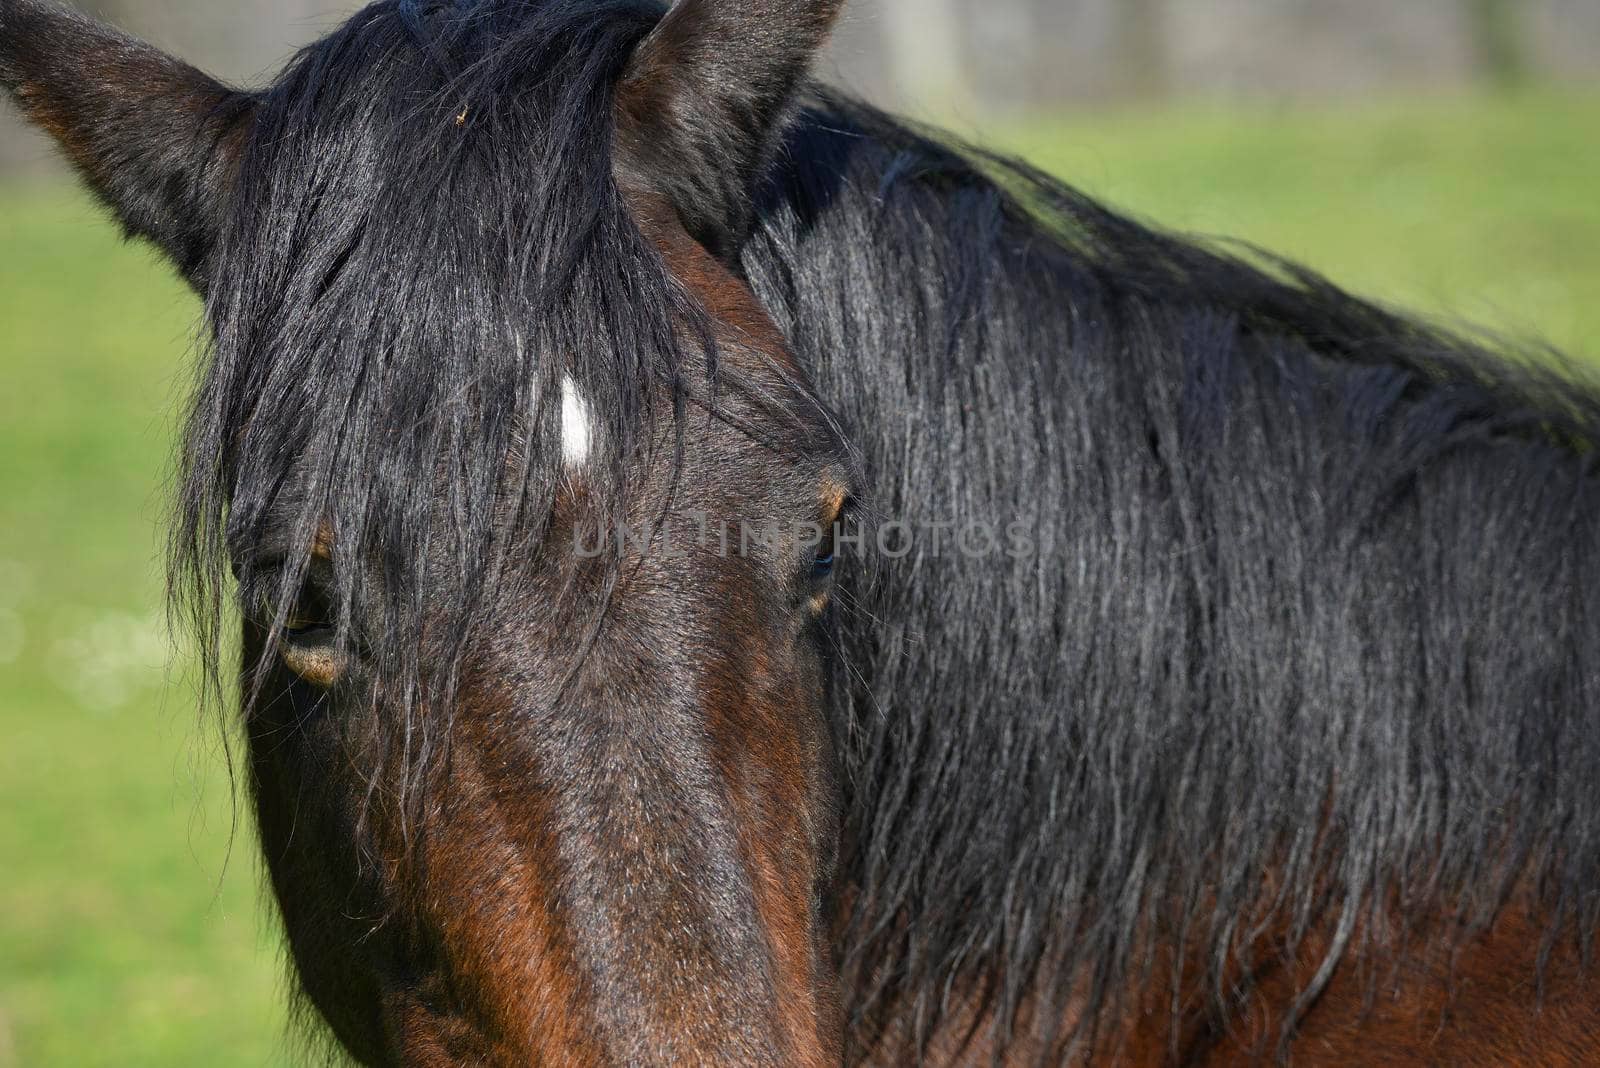 Detail of head of black and brown horse resting on a green grass under the sun